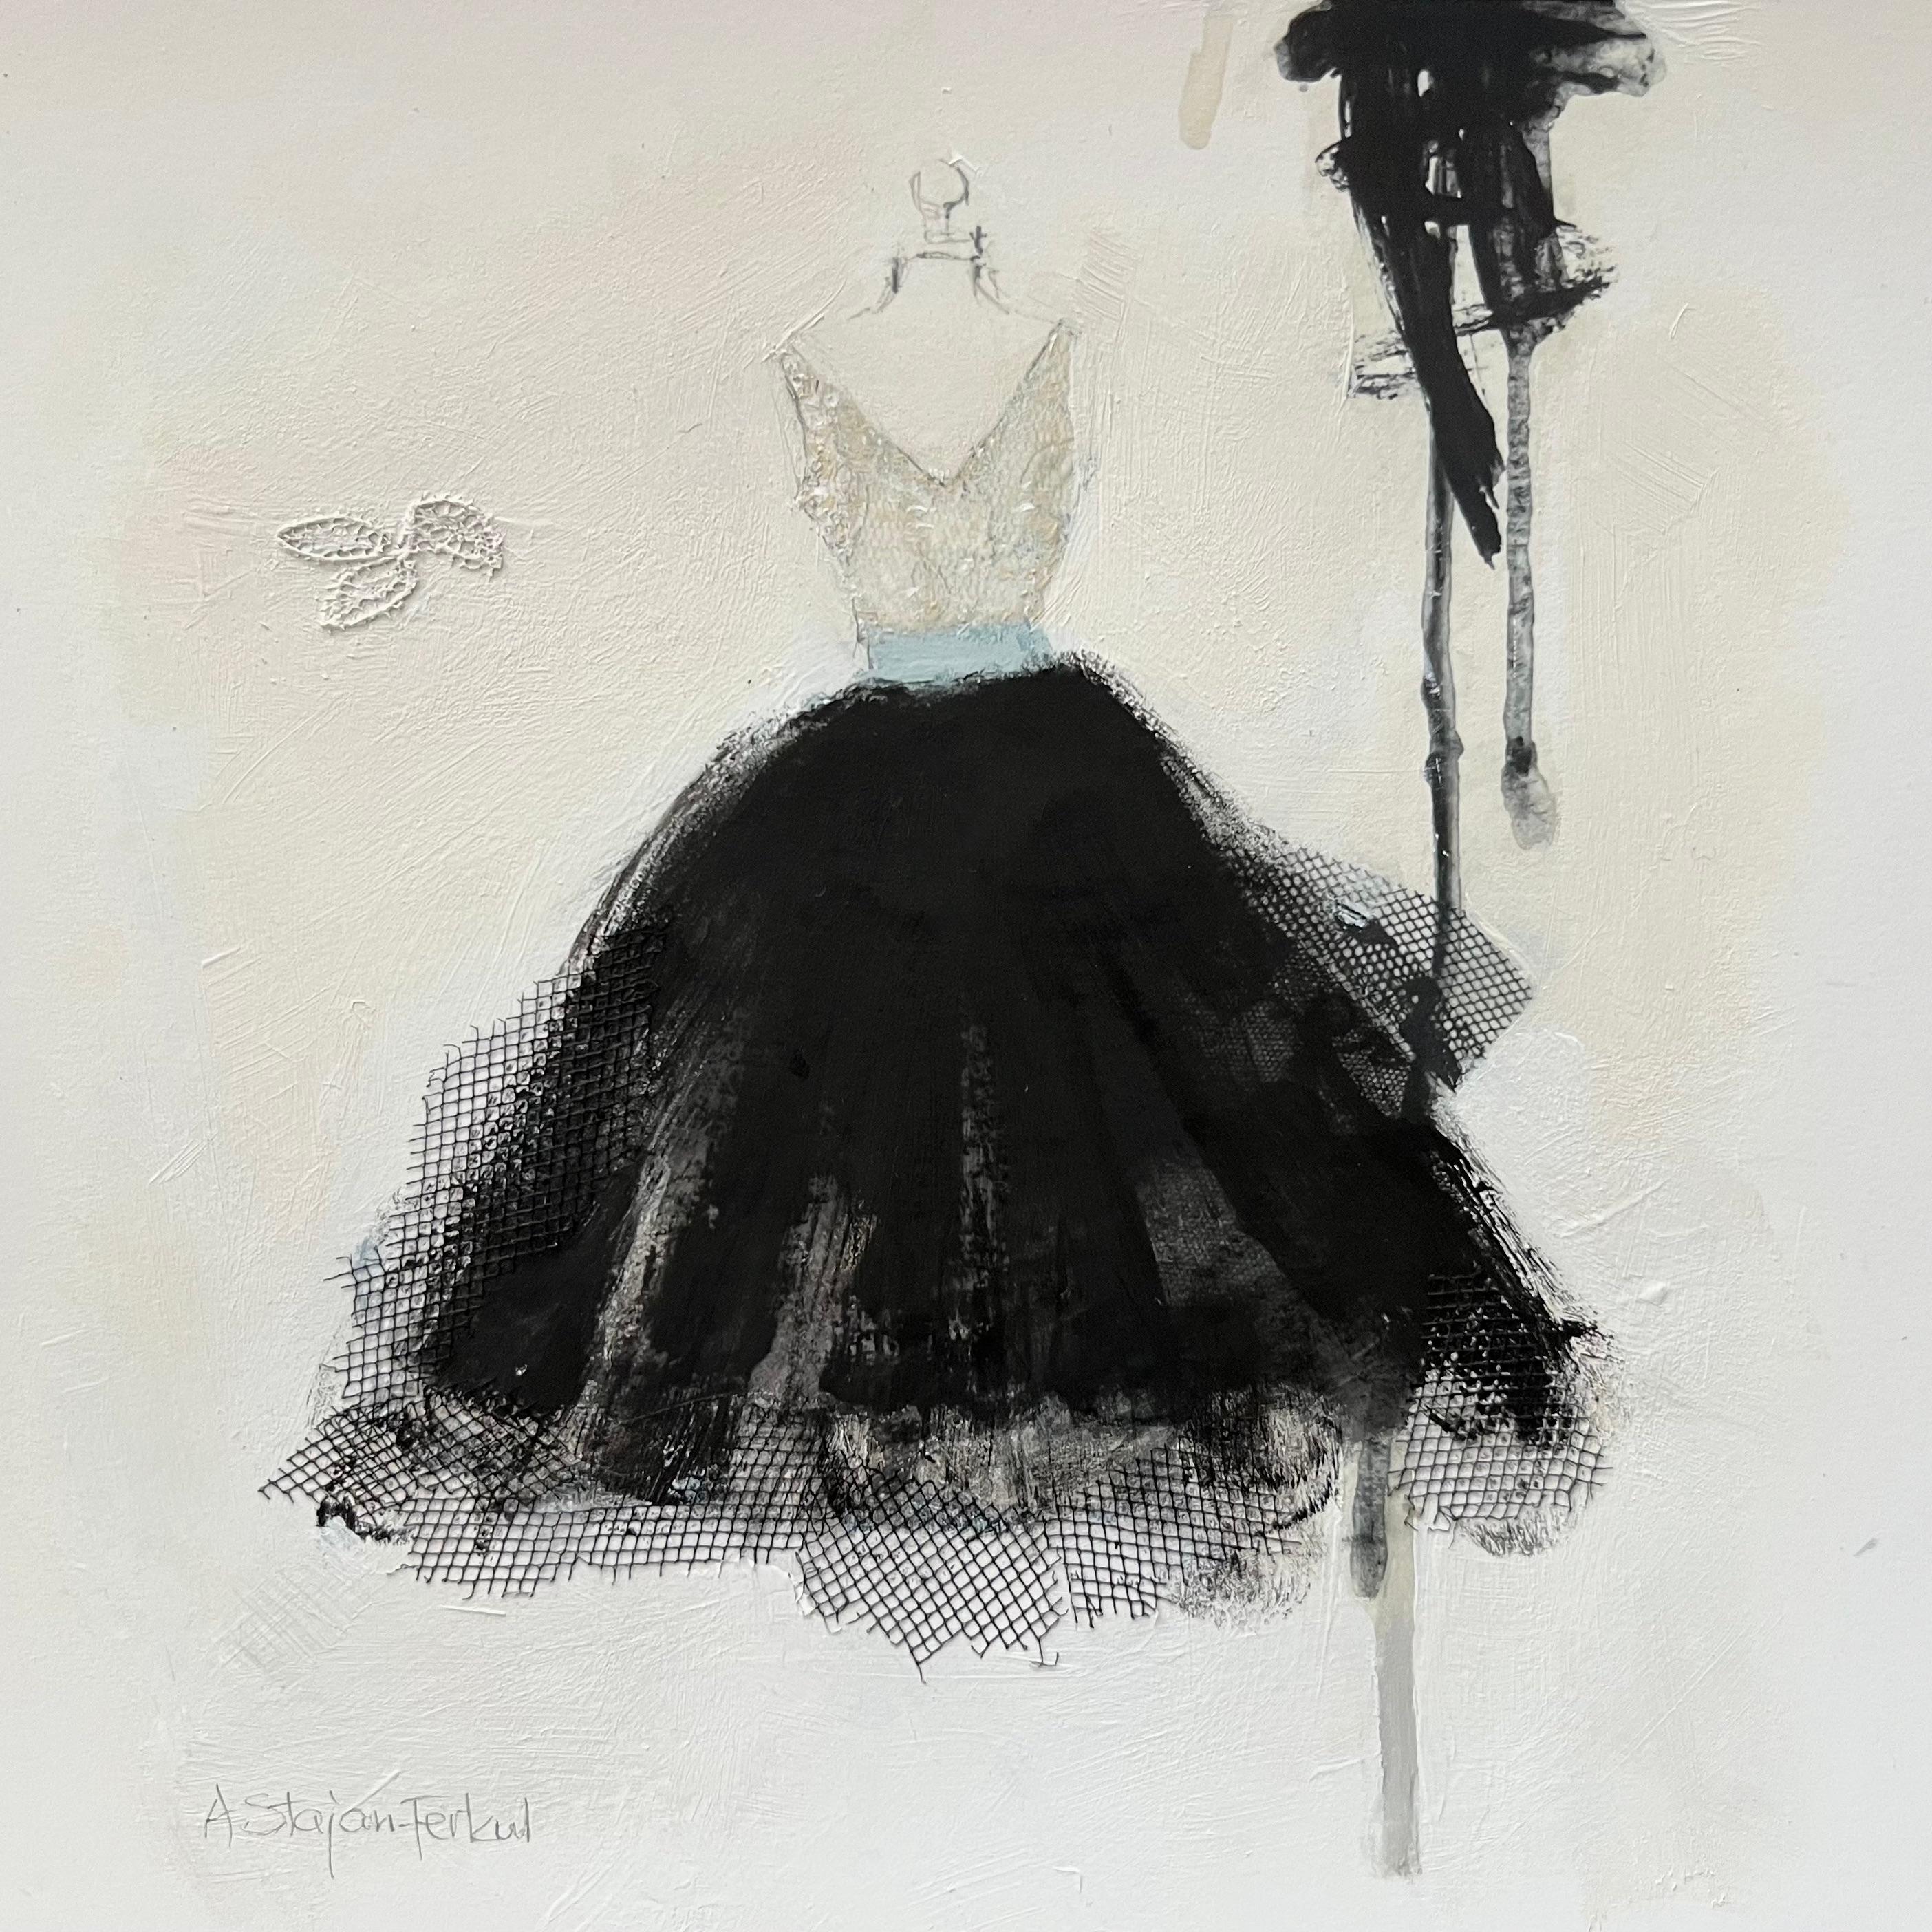 This dress evokes a sense of femininity, grace and timeless charm. The one-of-a-kind Giclée print is a high-quality reproduction of an original artwork printed on archival paper. Hand painted strokes and embellishments are added to give a unique